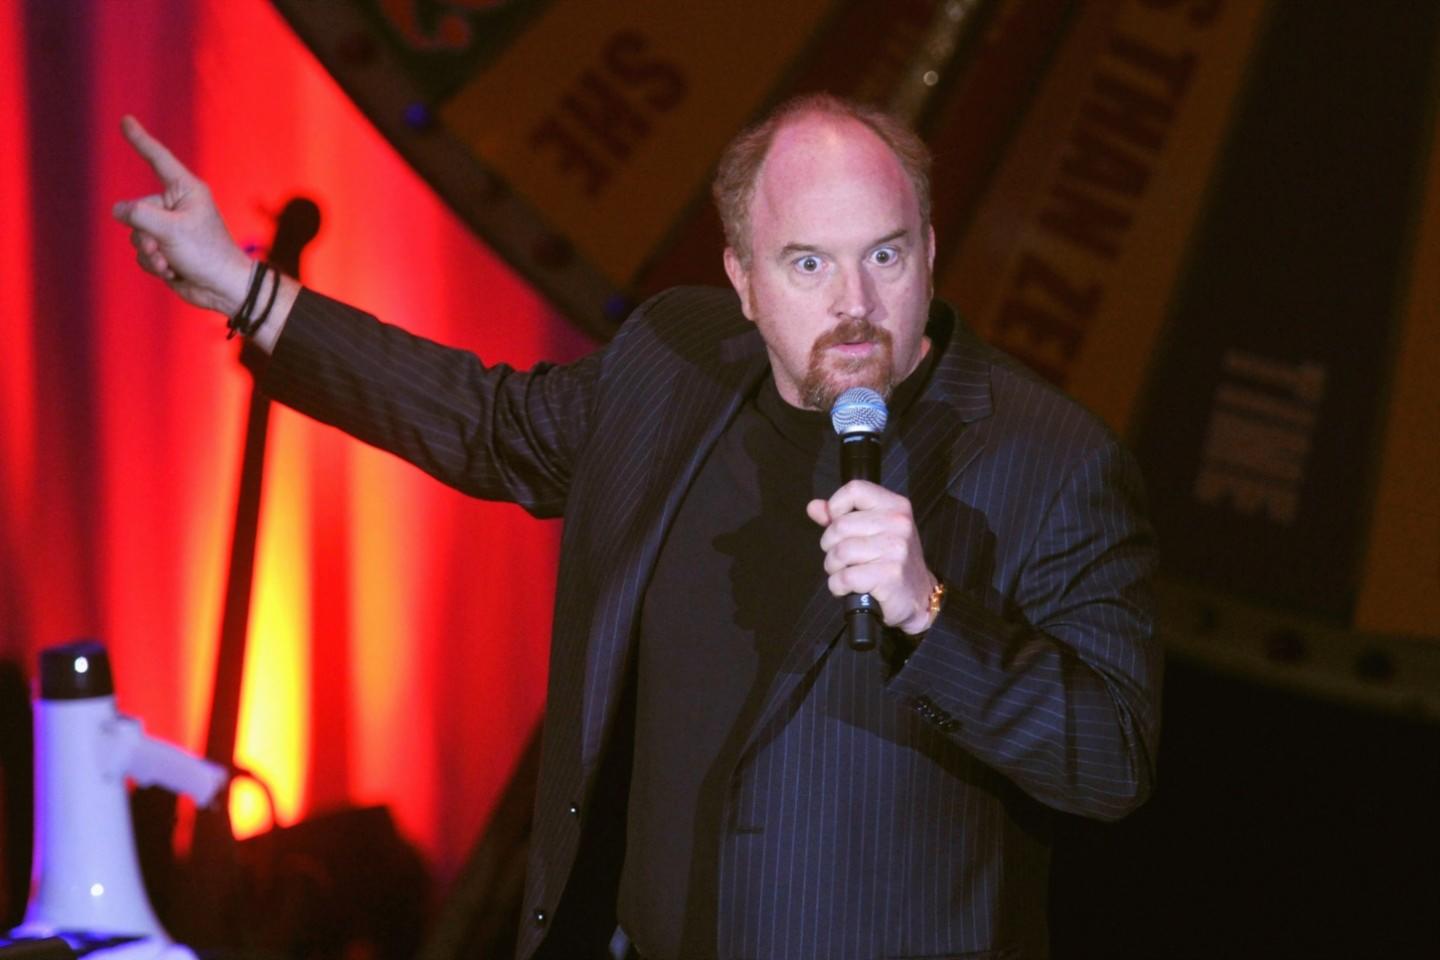 Louis C.K. Tickets | Buy or Sell Tickets for Louis C.K. Tour Dates 2021 - viagogo